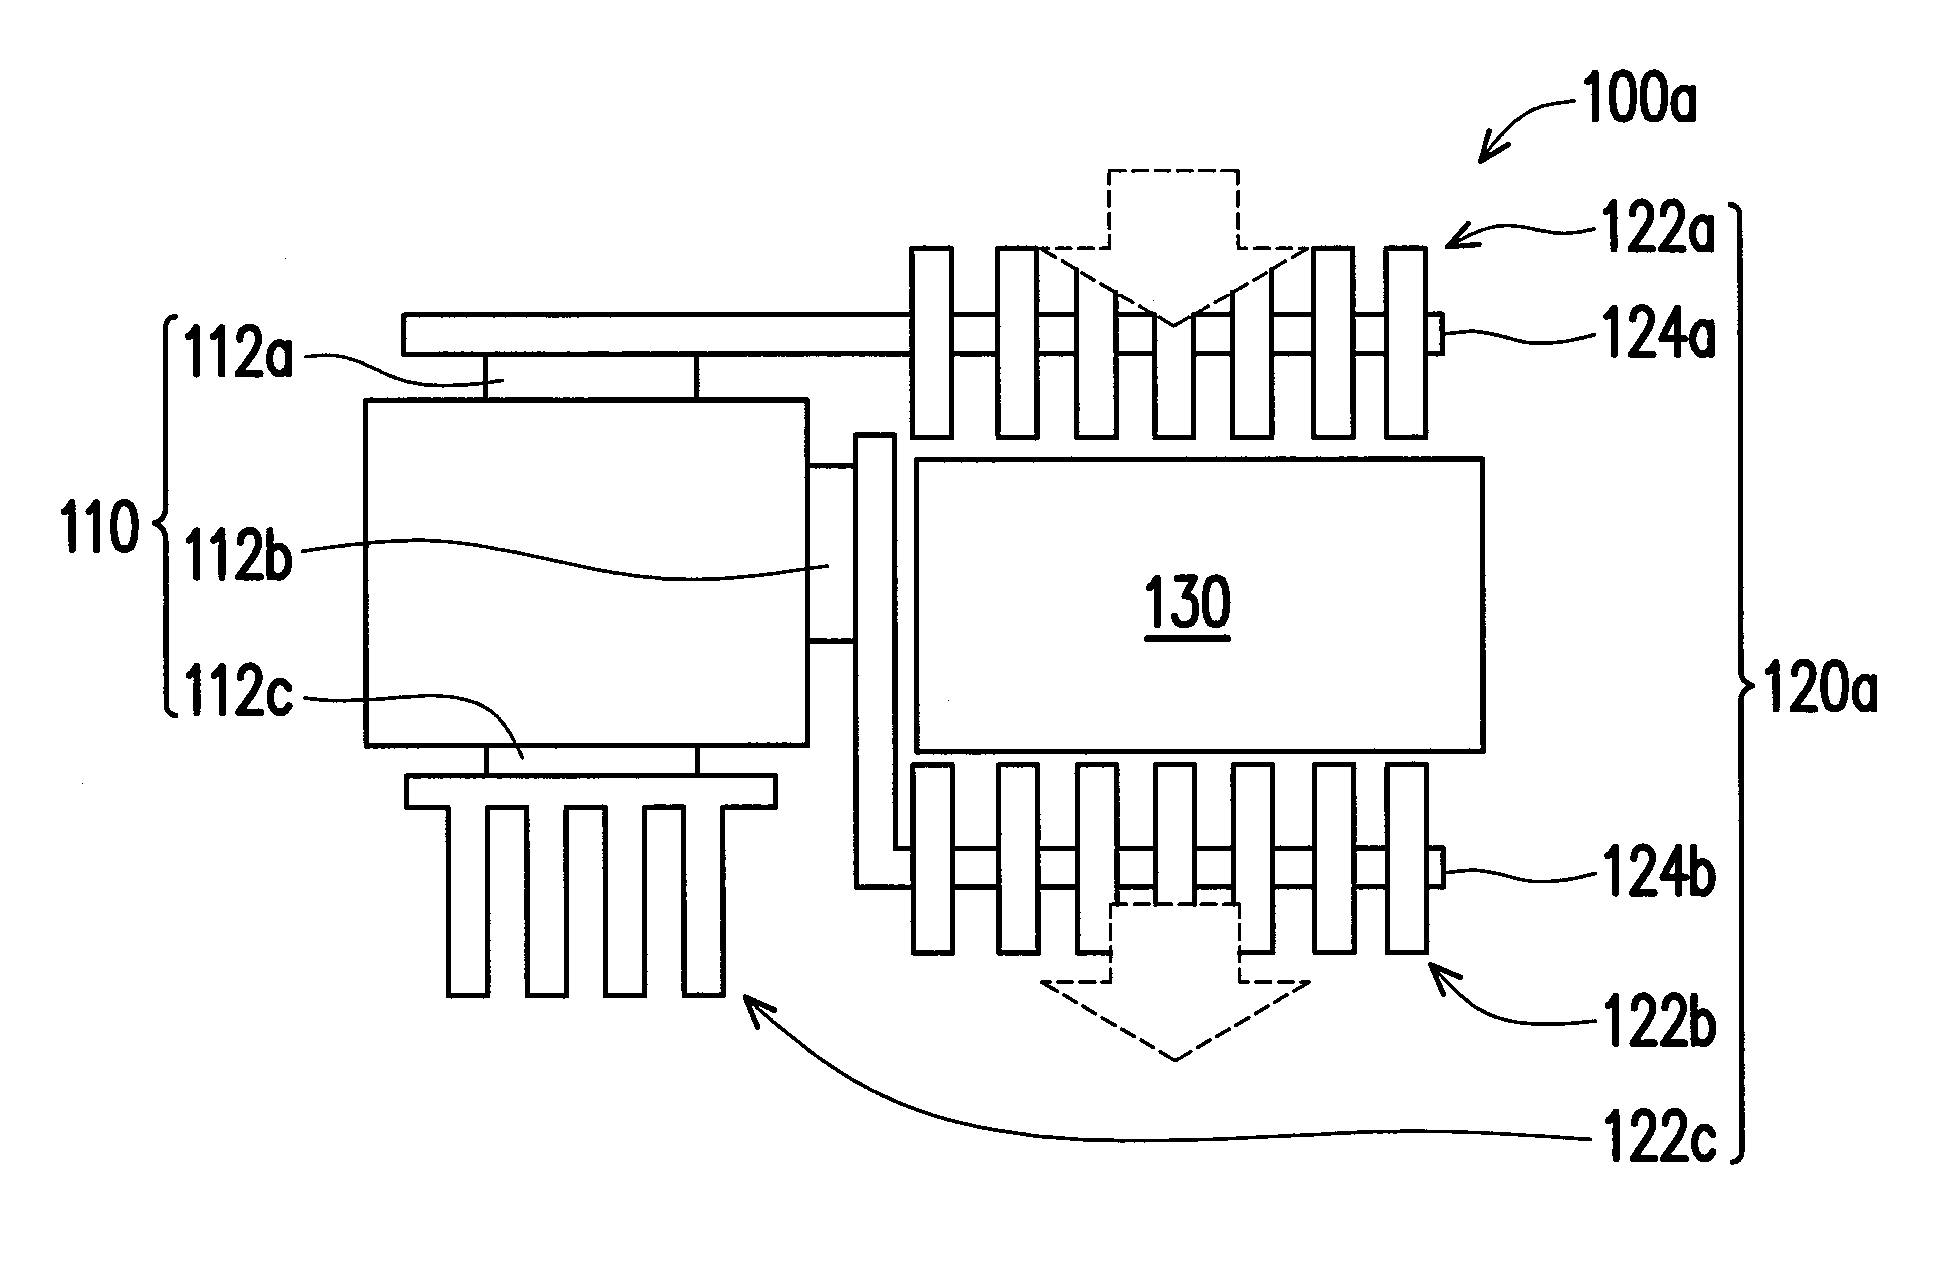 Projection apparatus having illumination system and associated ion fan